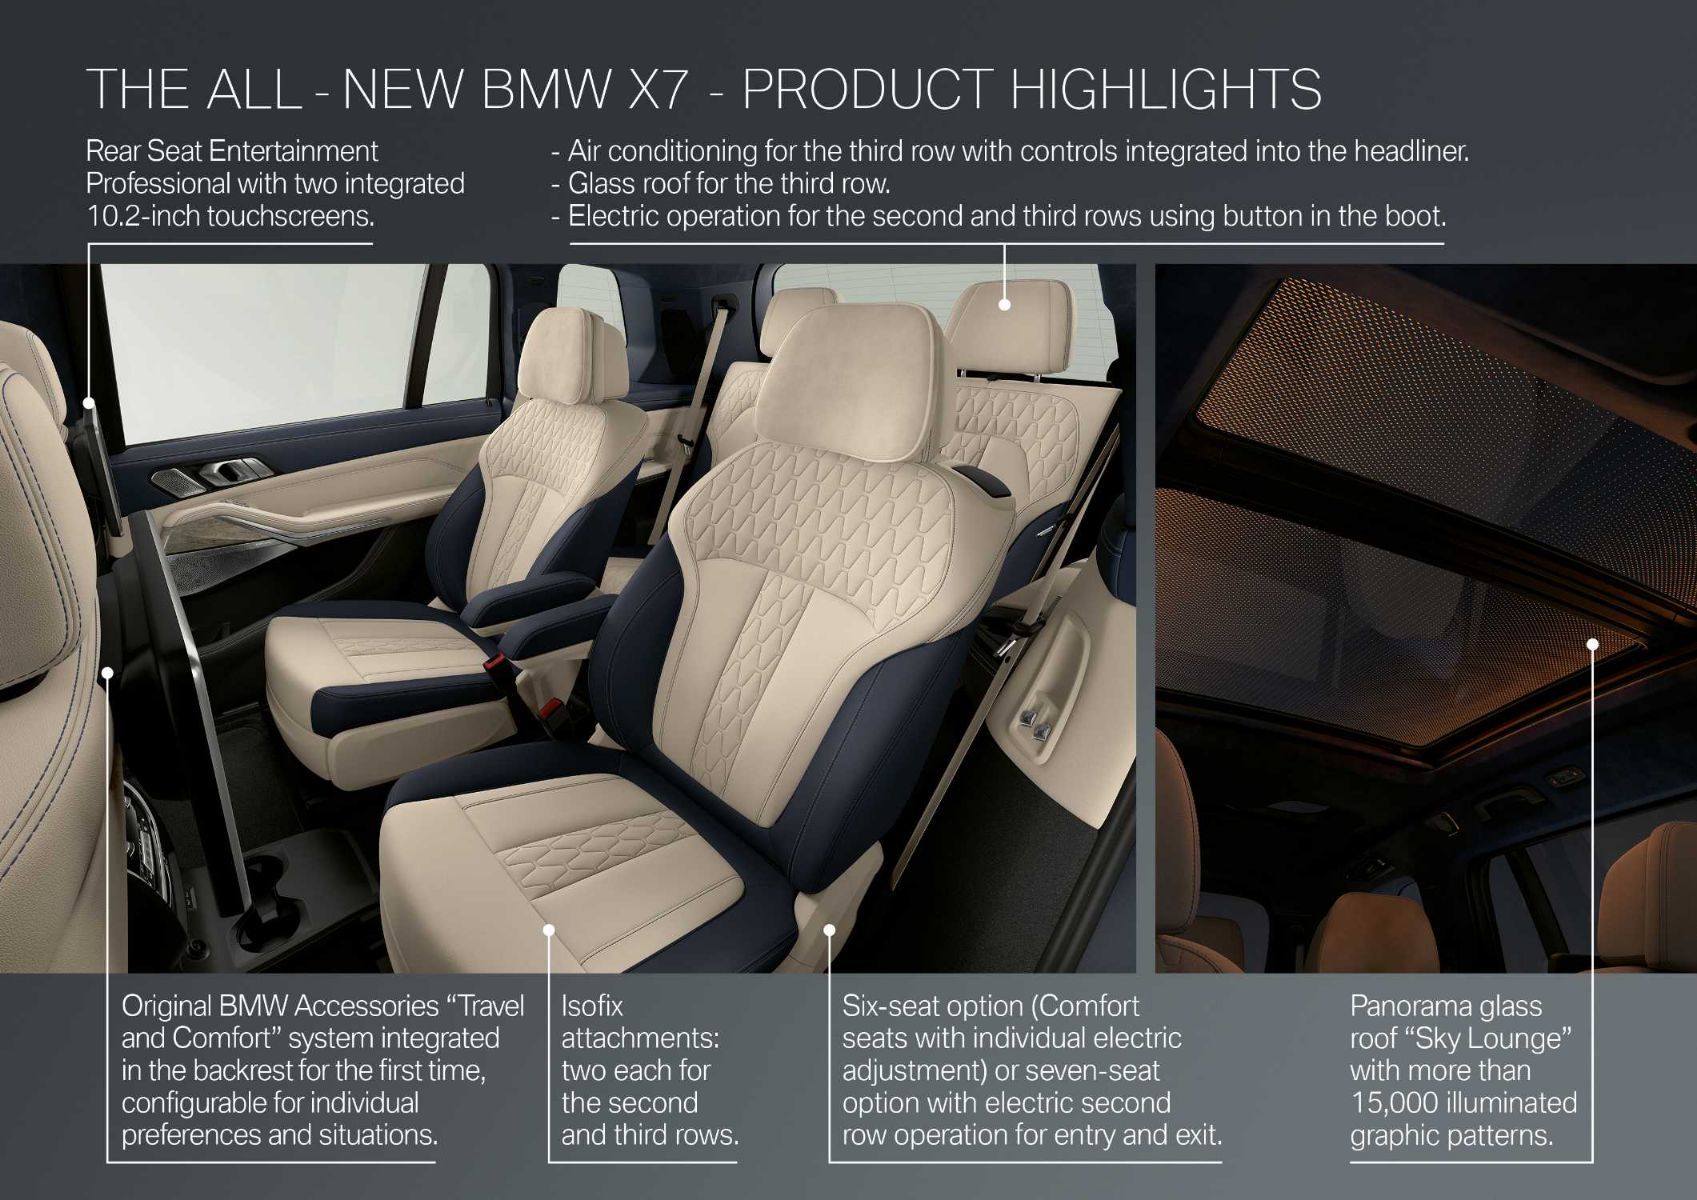 2019 BMW X7 product highlights